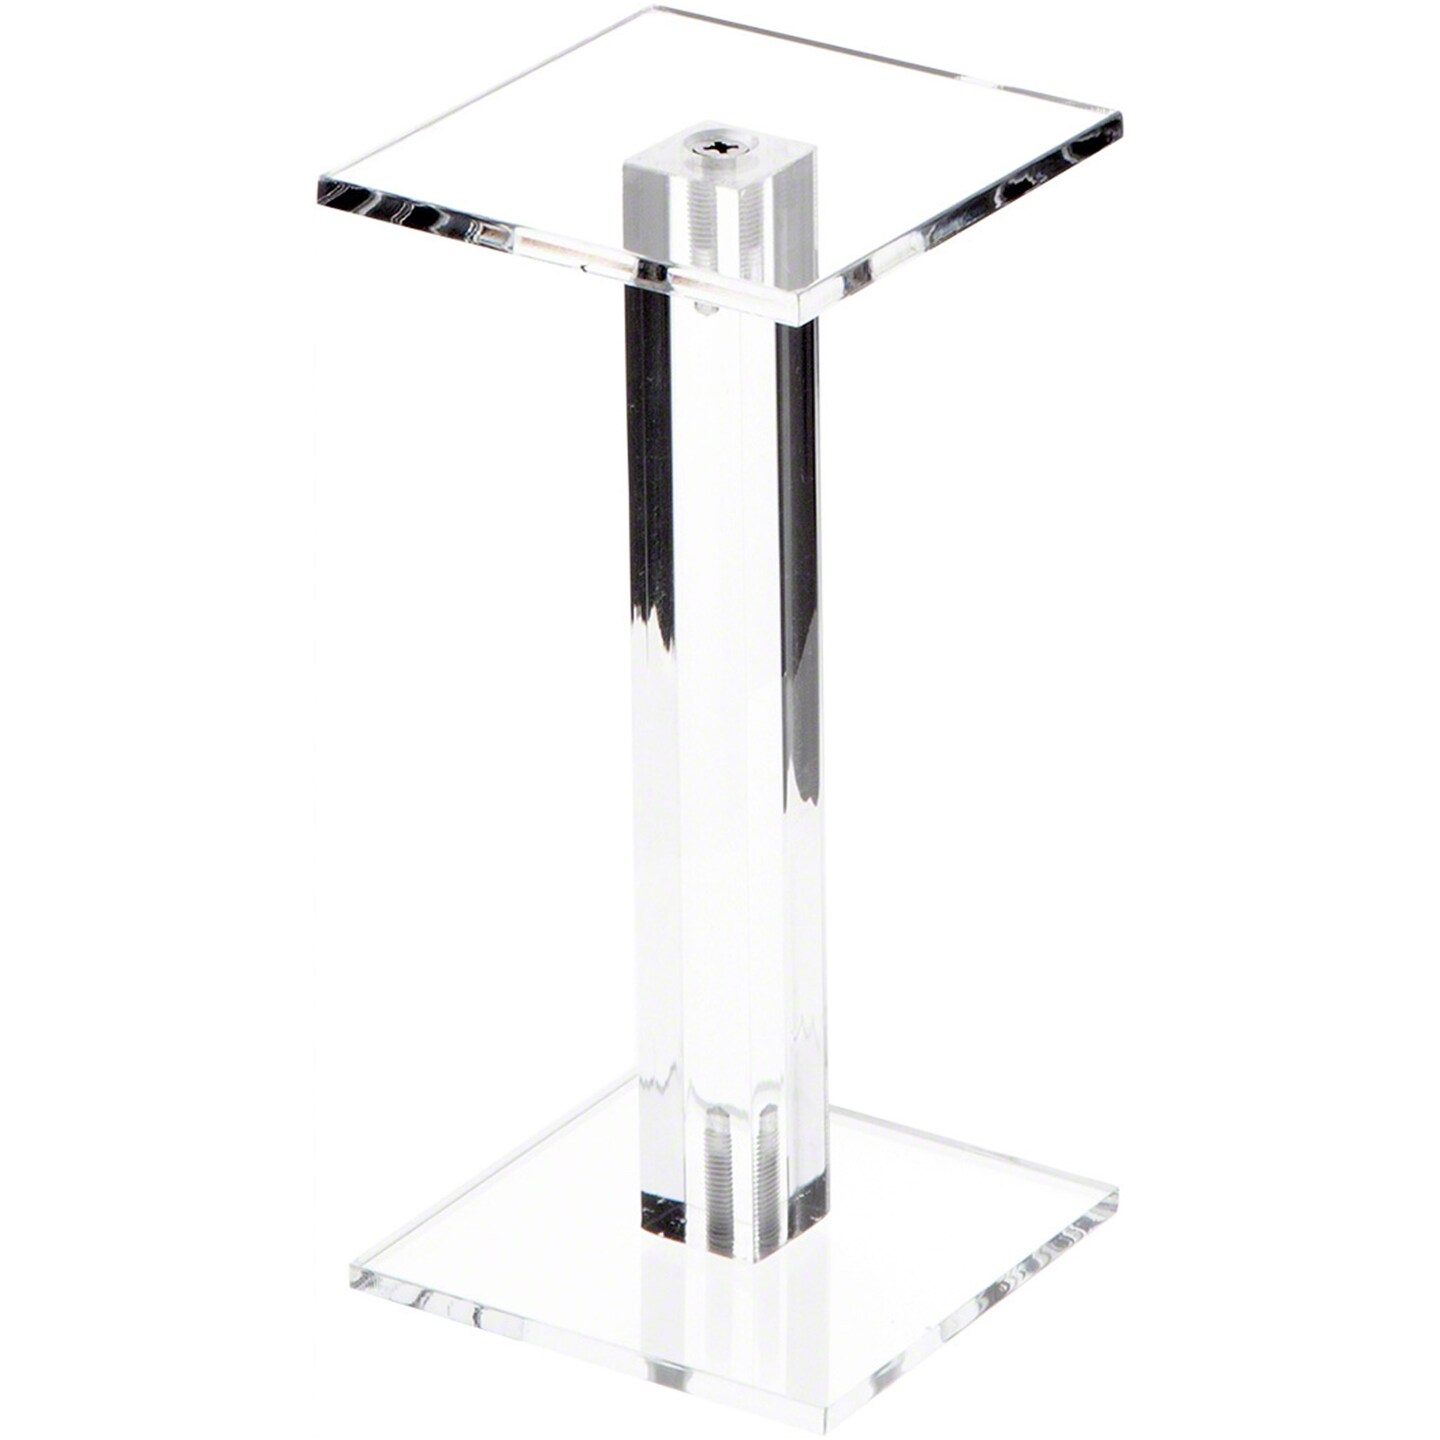 Plymor Clear Acrylic Square Barbell Pedestal Display Riser 8.375 inches (Height) x 3 inches (Width) x 3 inches (Depth) (3/16 inches thick)